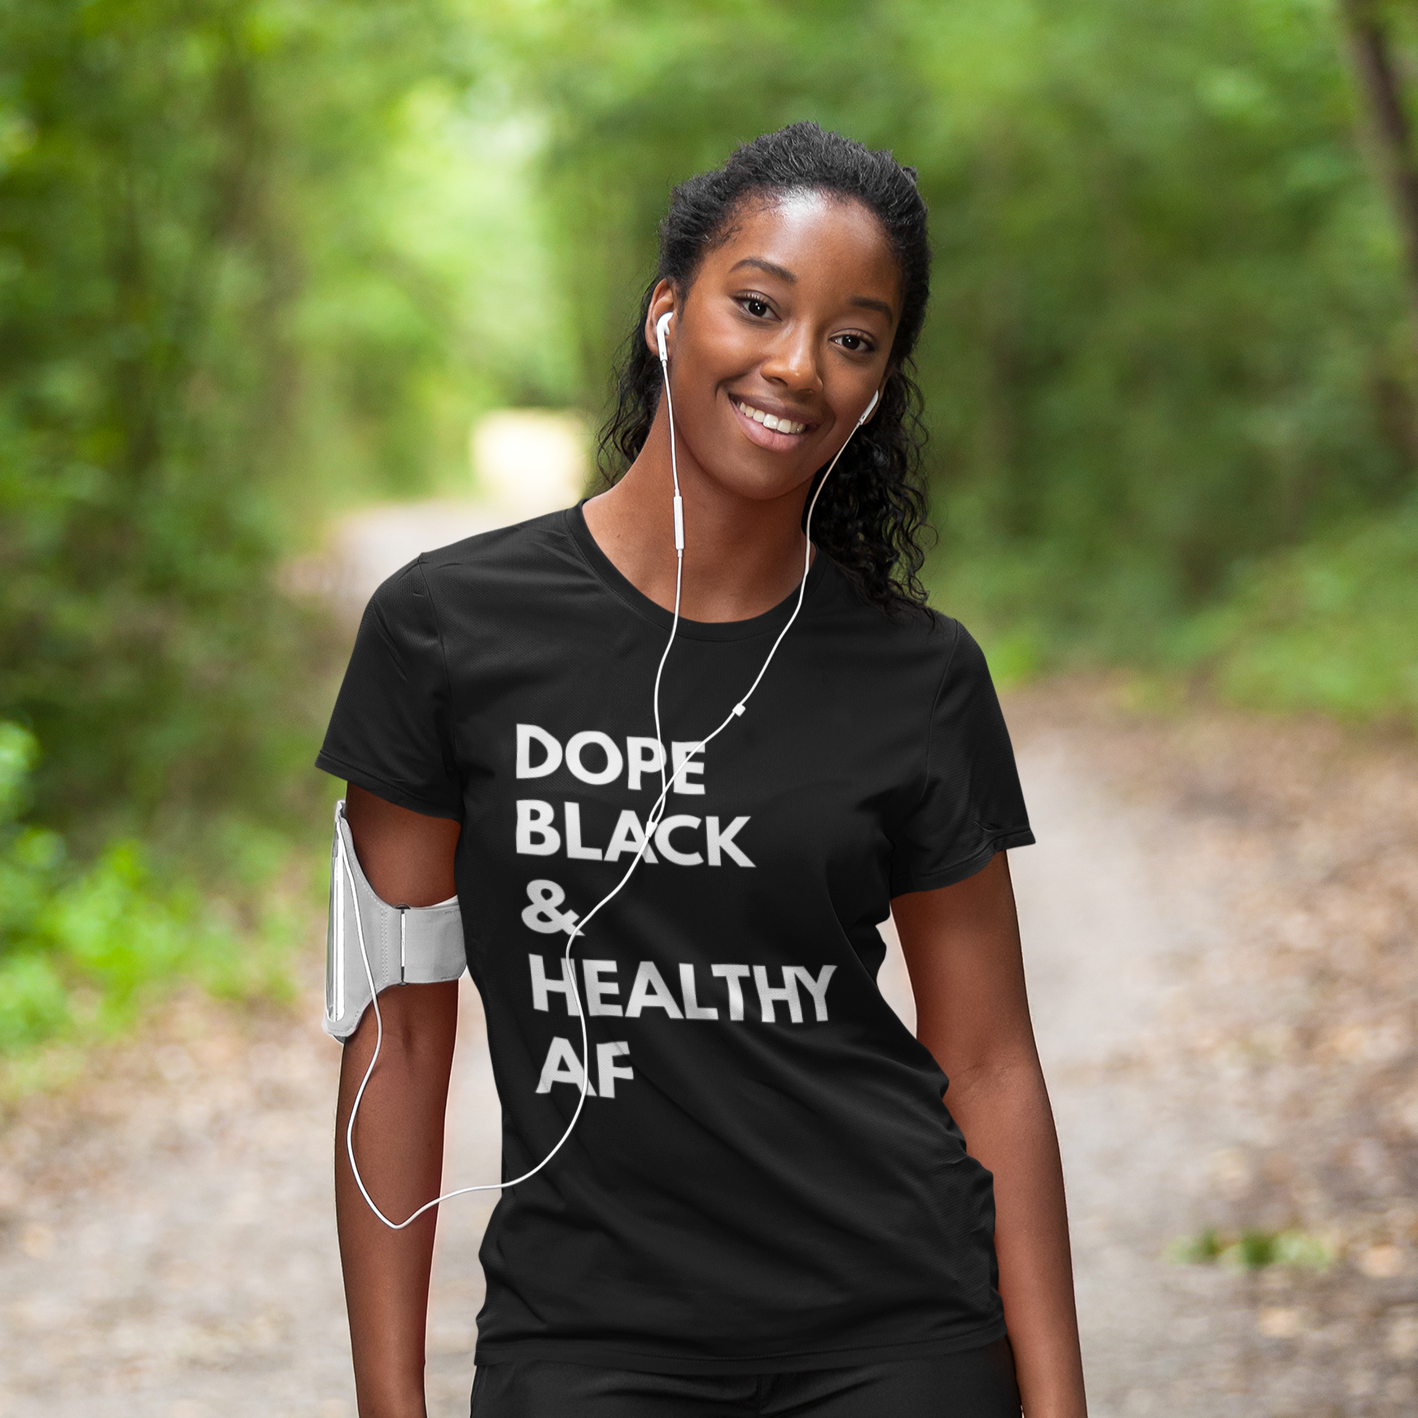 dope black and healthy af women's t-shirt